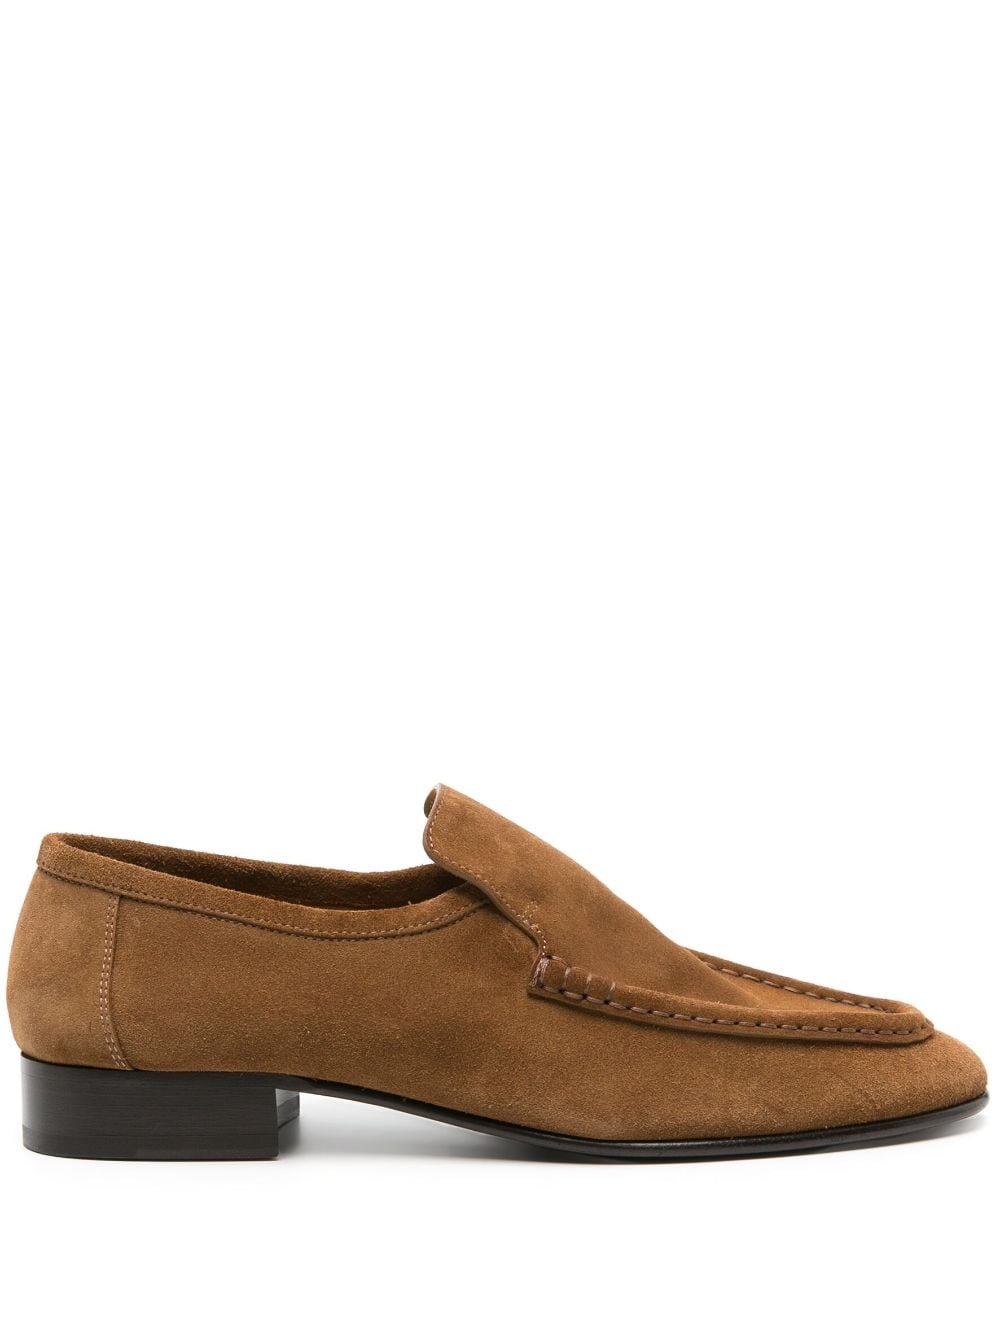 New Soft suede loafers - 1